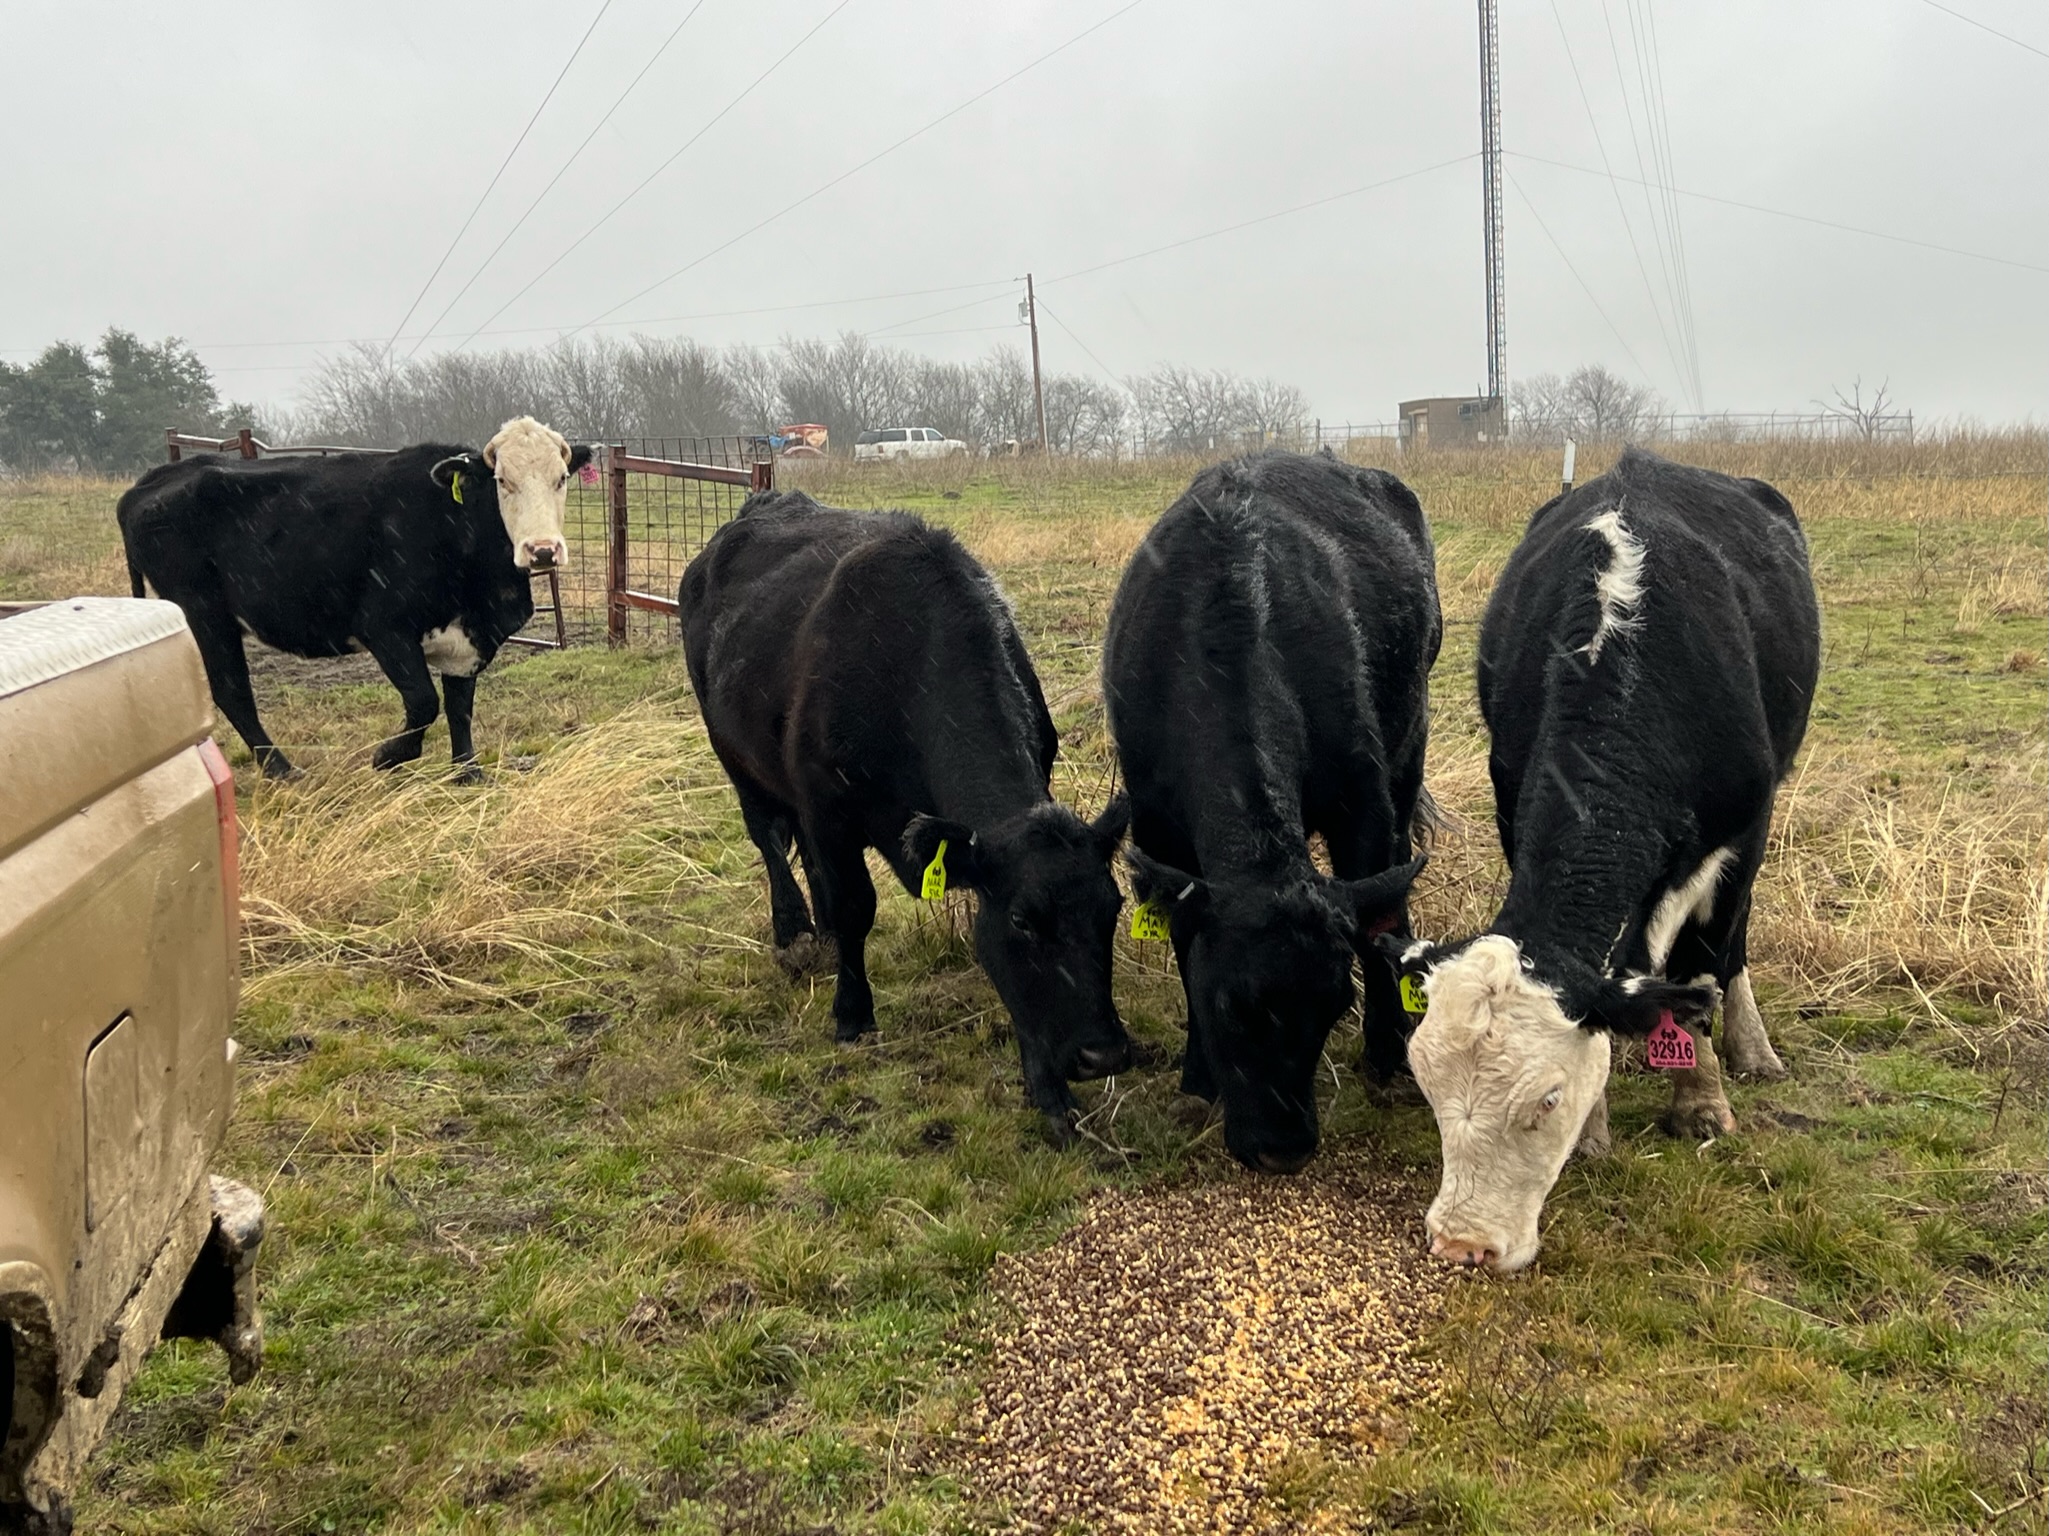 4 head of Black Angus and Black Baldy cows, #0131